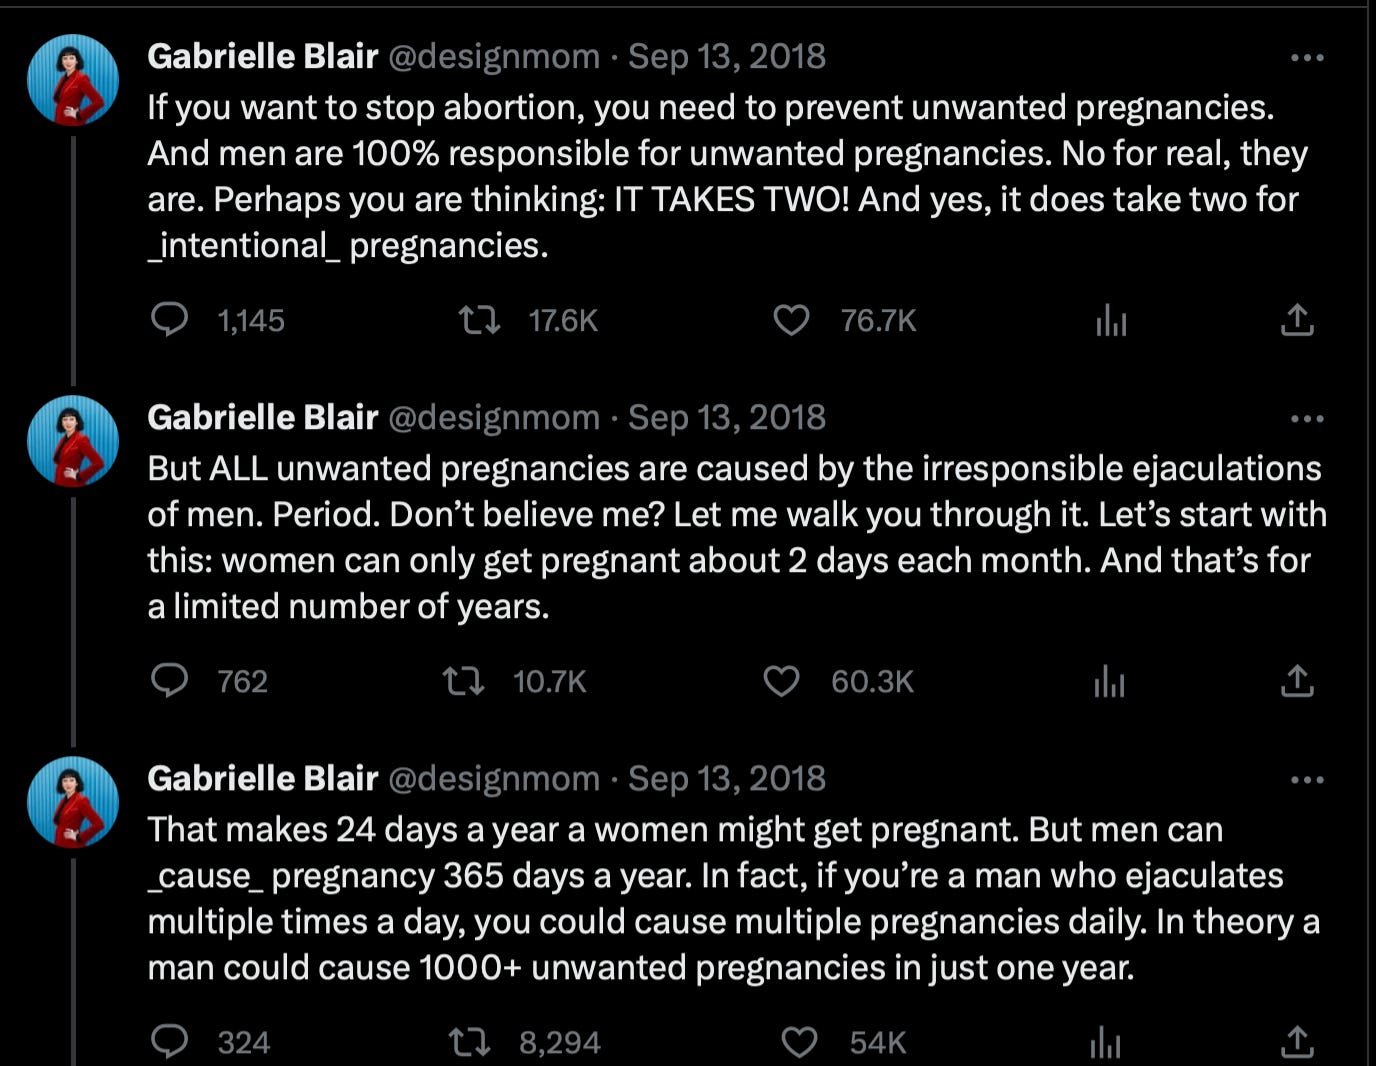 screenshot of Gabrielle Blair's famous twitter post about how to stop abortion